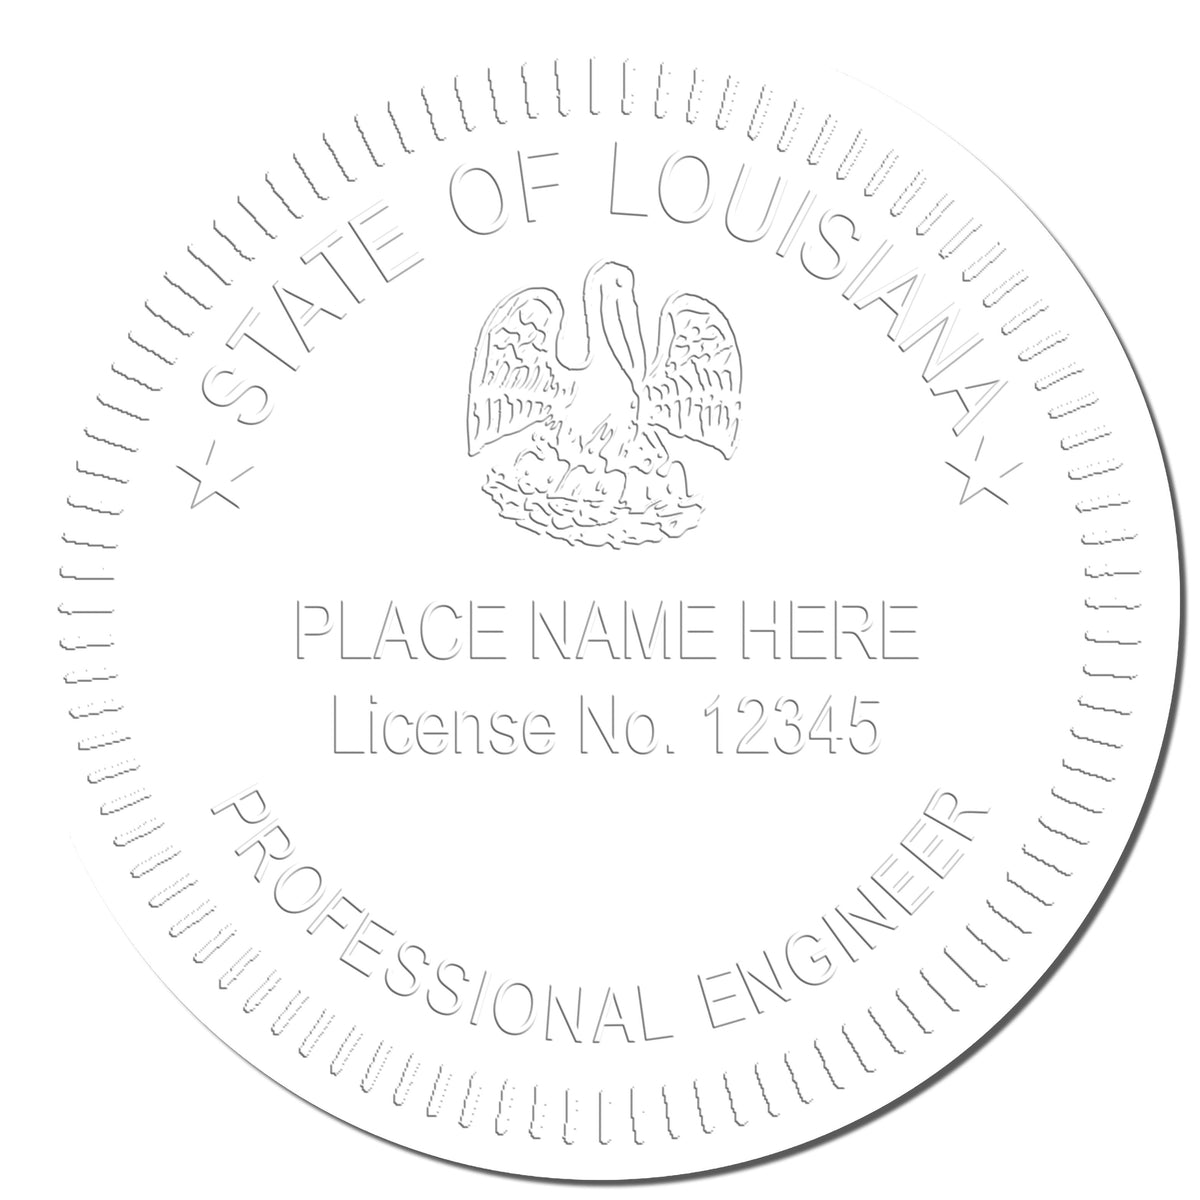 Another Example of a stamped impression of the Louisiana Engineer Desk Seal on a piece of office paper.